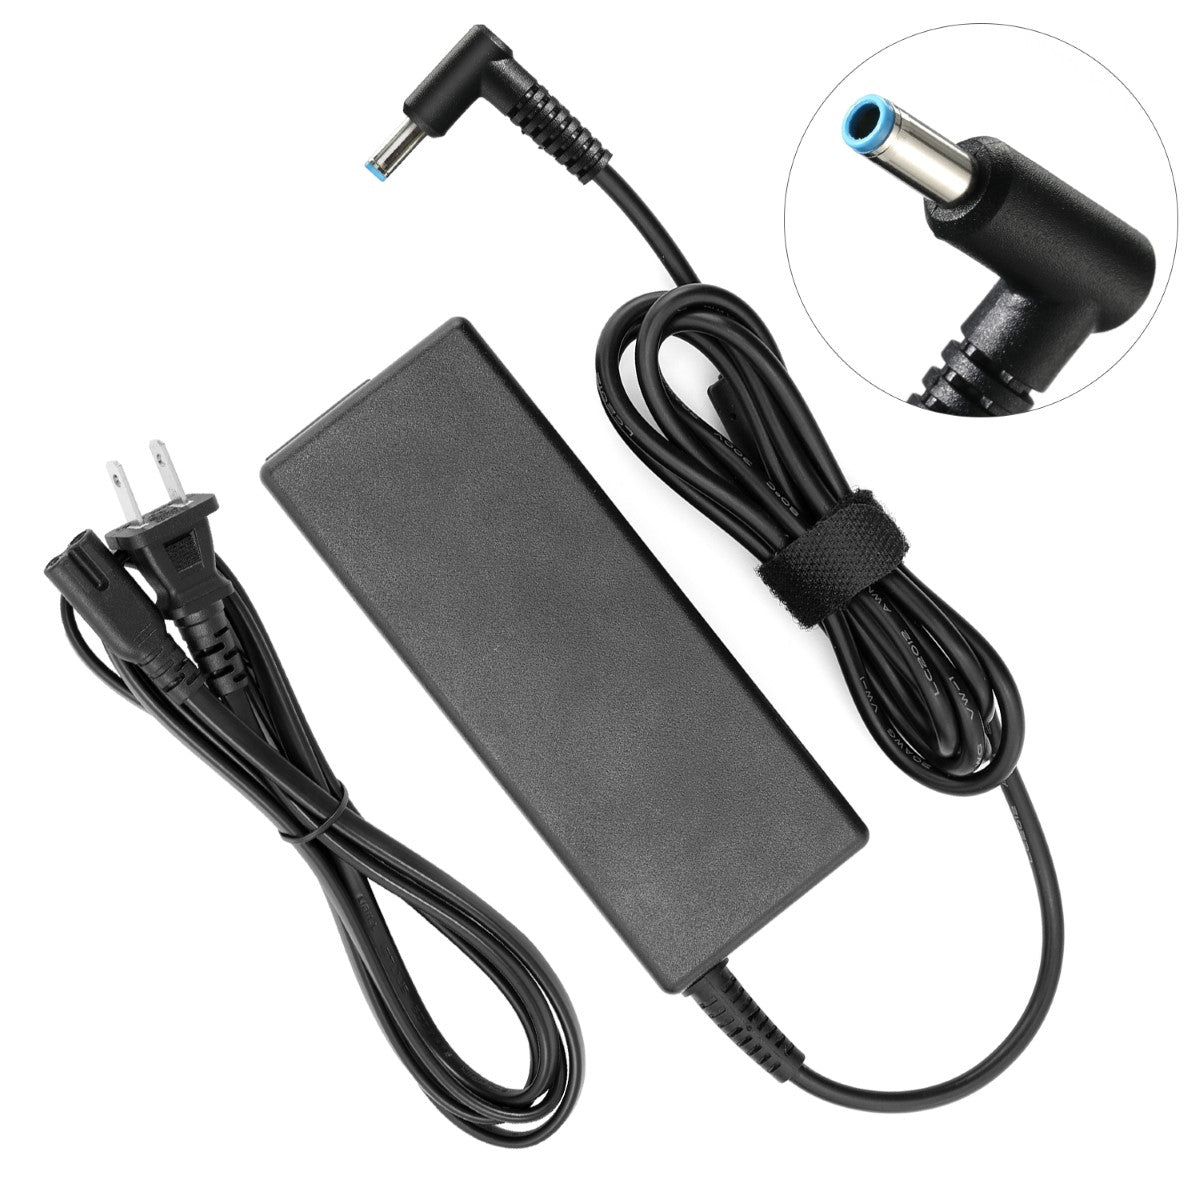 AC Adapter Charger for HP Envy TouchSmart m6-k025dx Notebook.